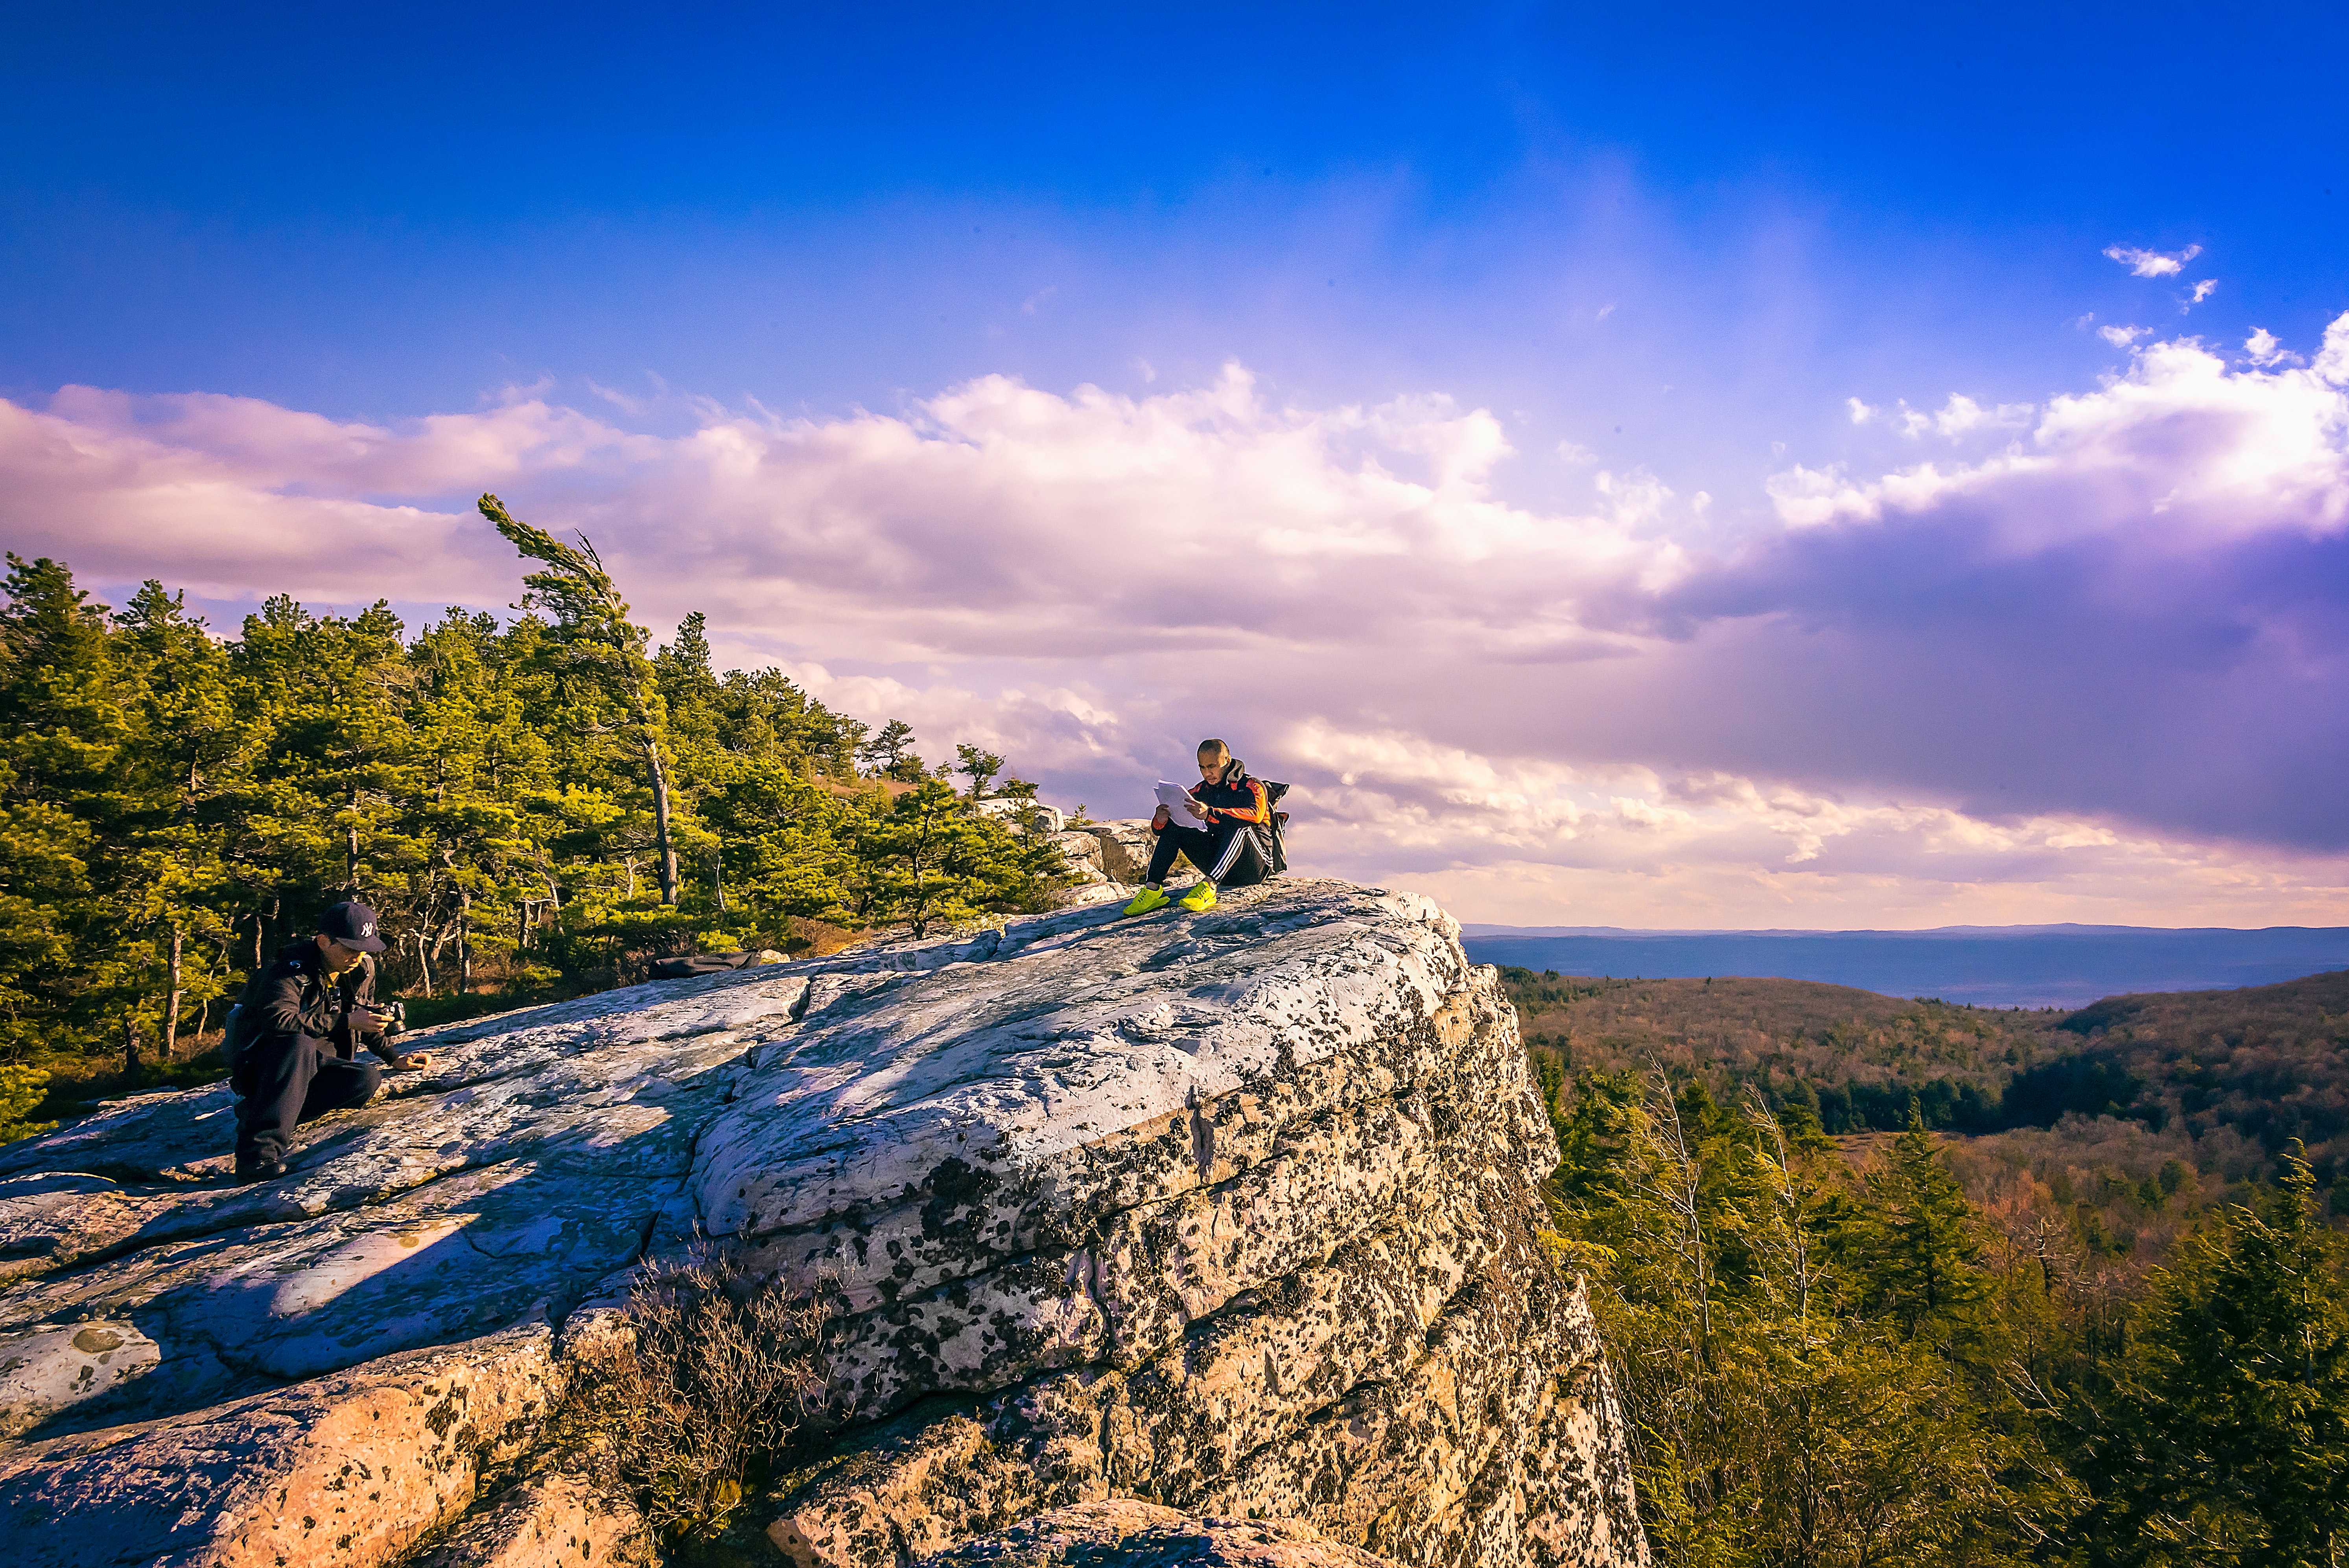 Man sitting atop a mountain staring into a beautiful sky with clouds.